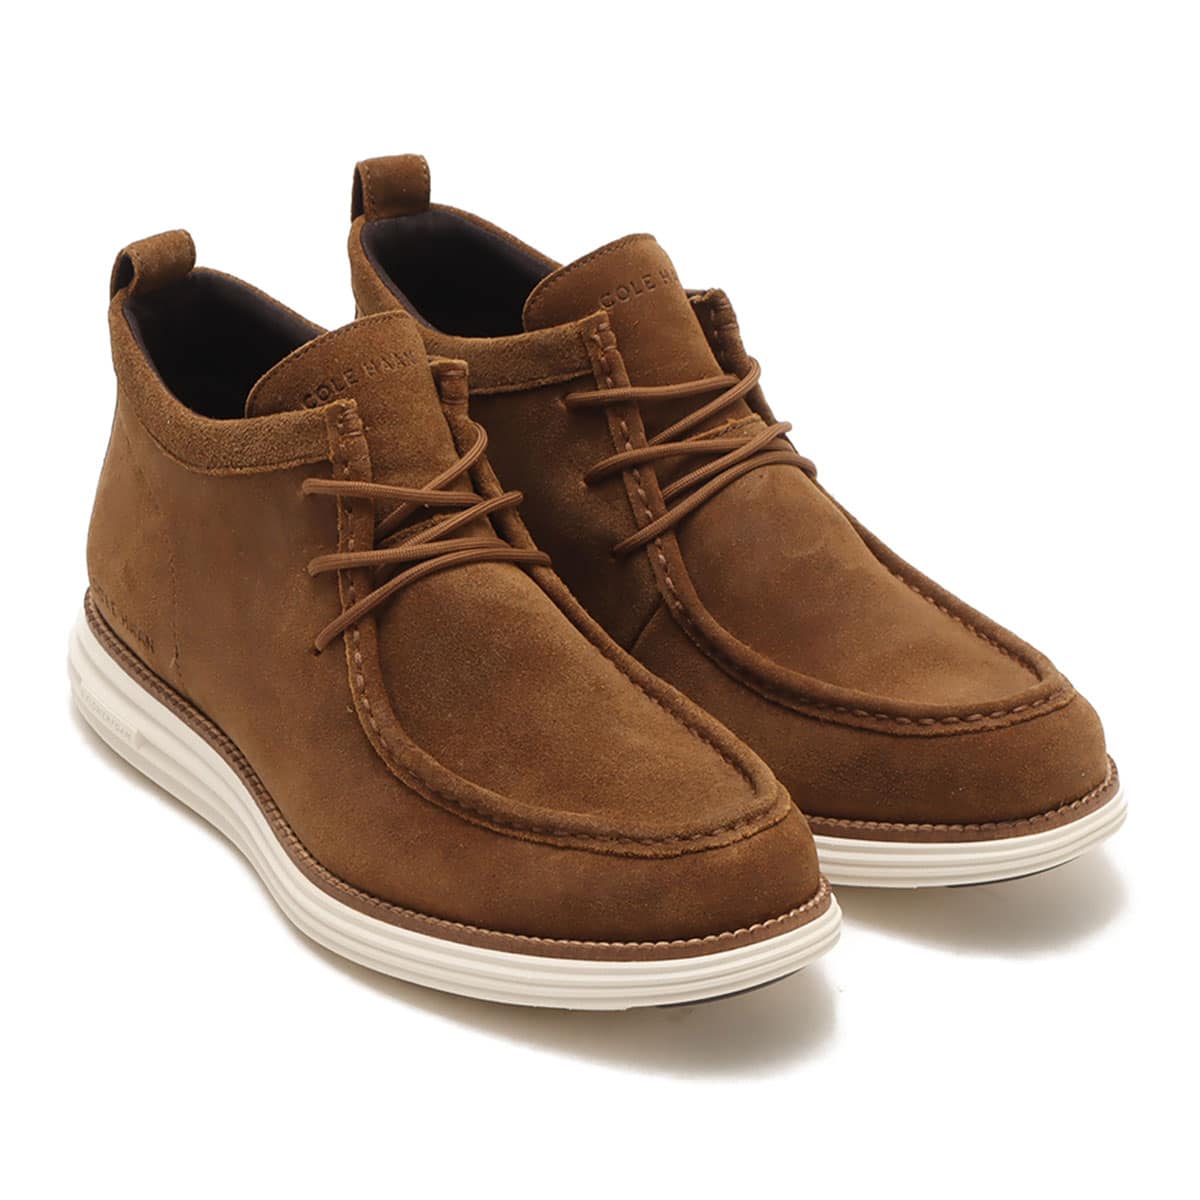 COLE HAAN ORIGINALGRAND MOC TOE CHUKKA OILY BROWN SUEDE/CH NATURAL/IVORY WR 23FA-I_photo_large